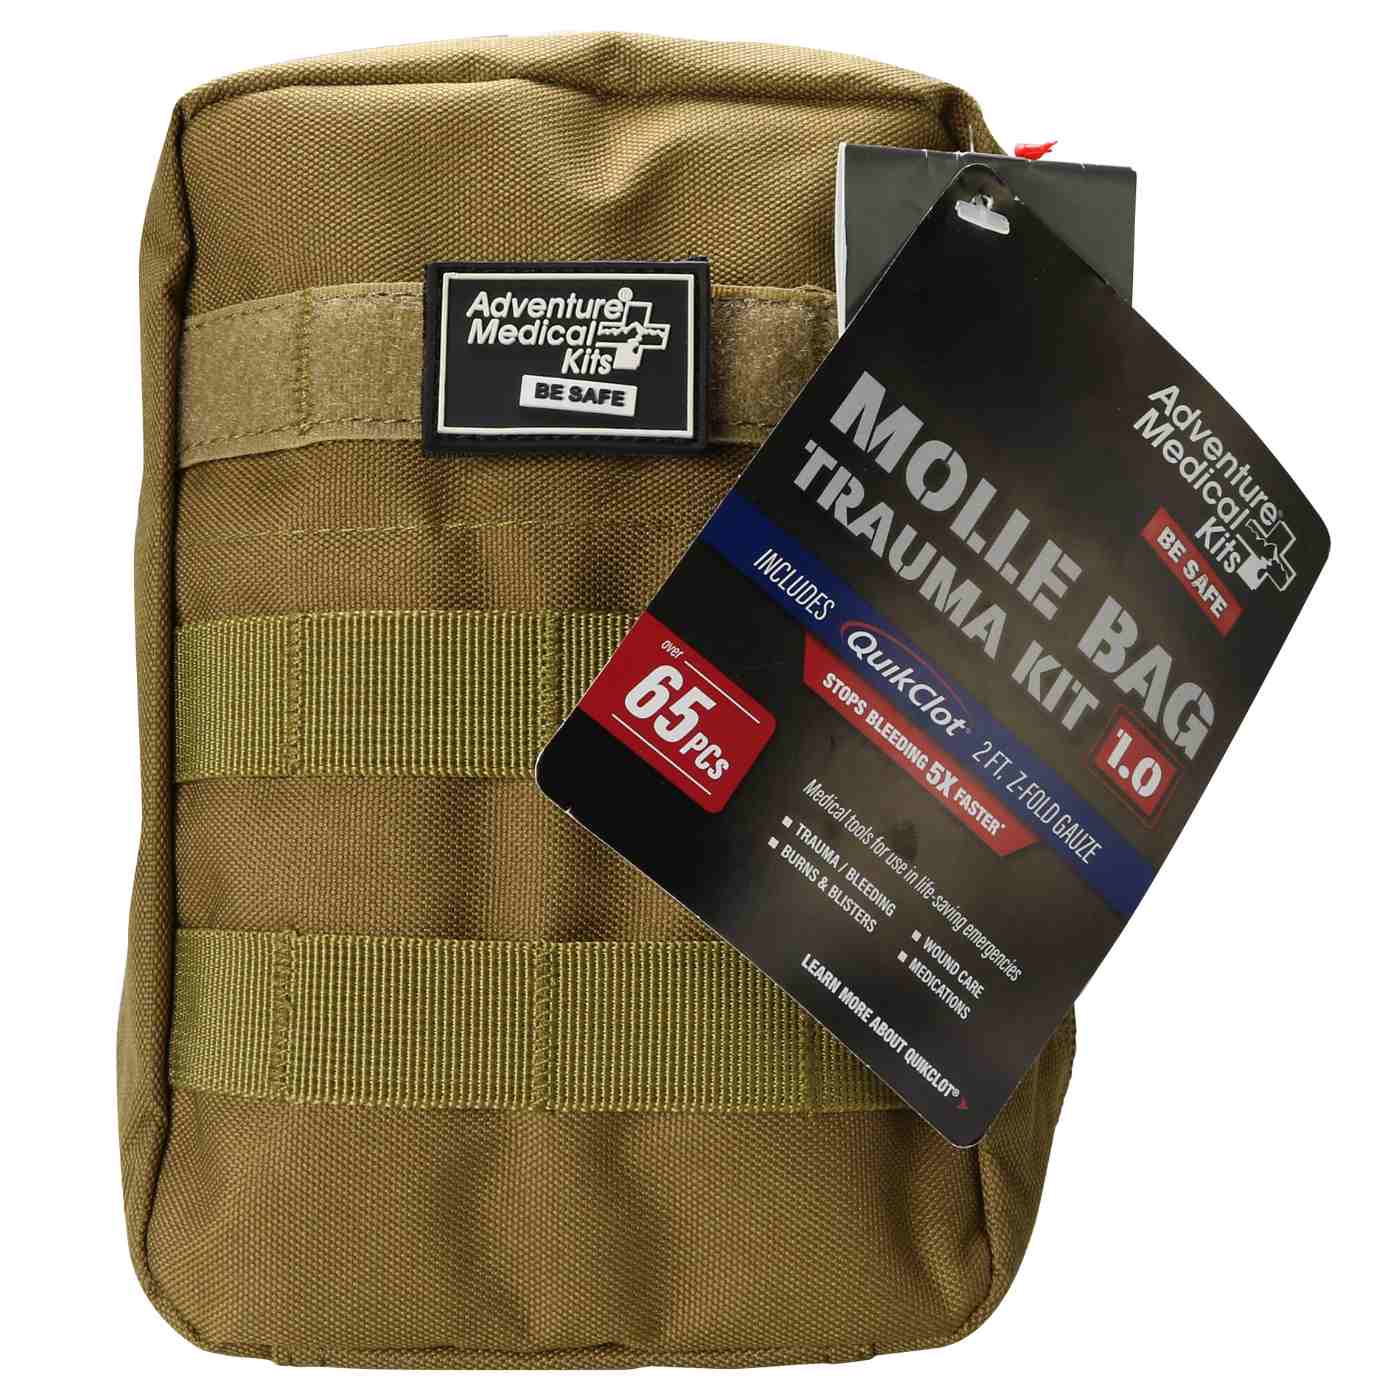 MOLLE Bag Trauma Kit 1.0 - Khaki front in packaging